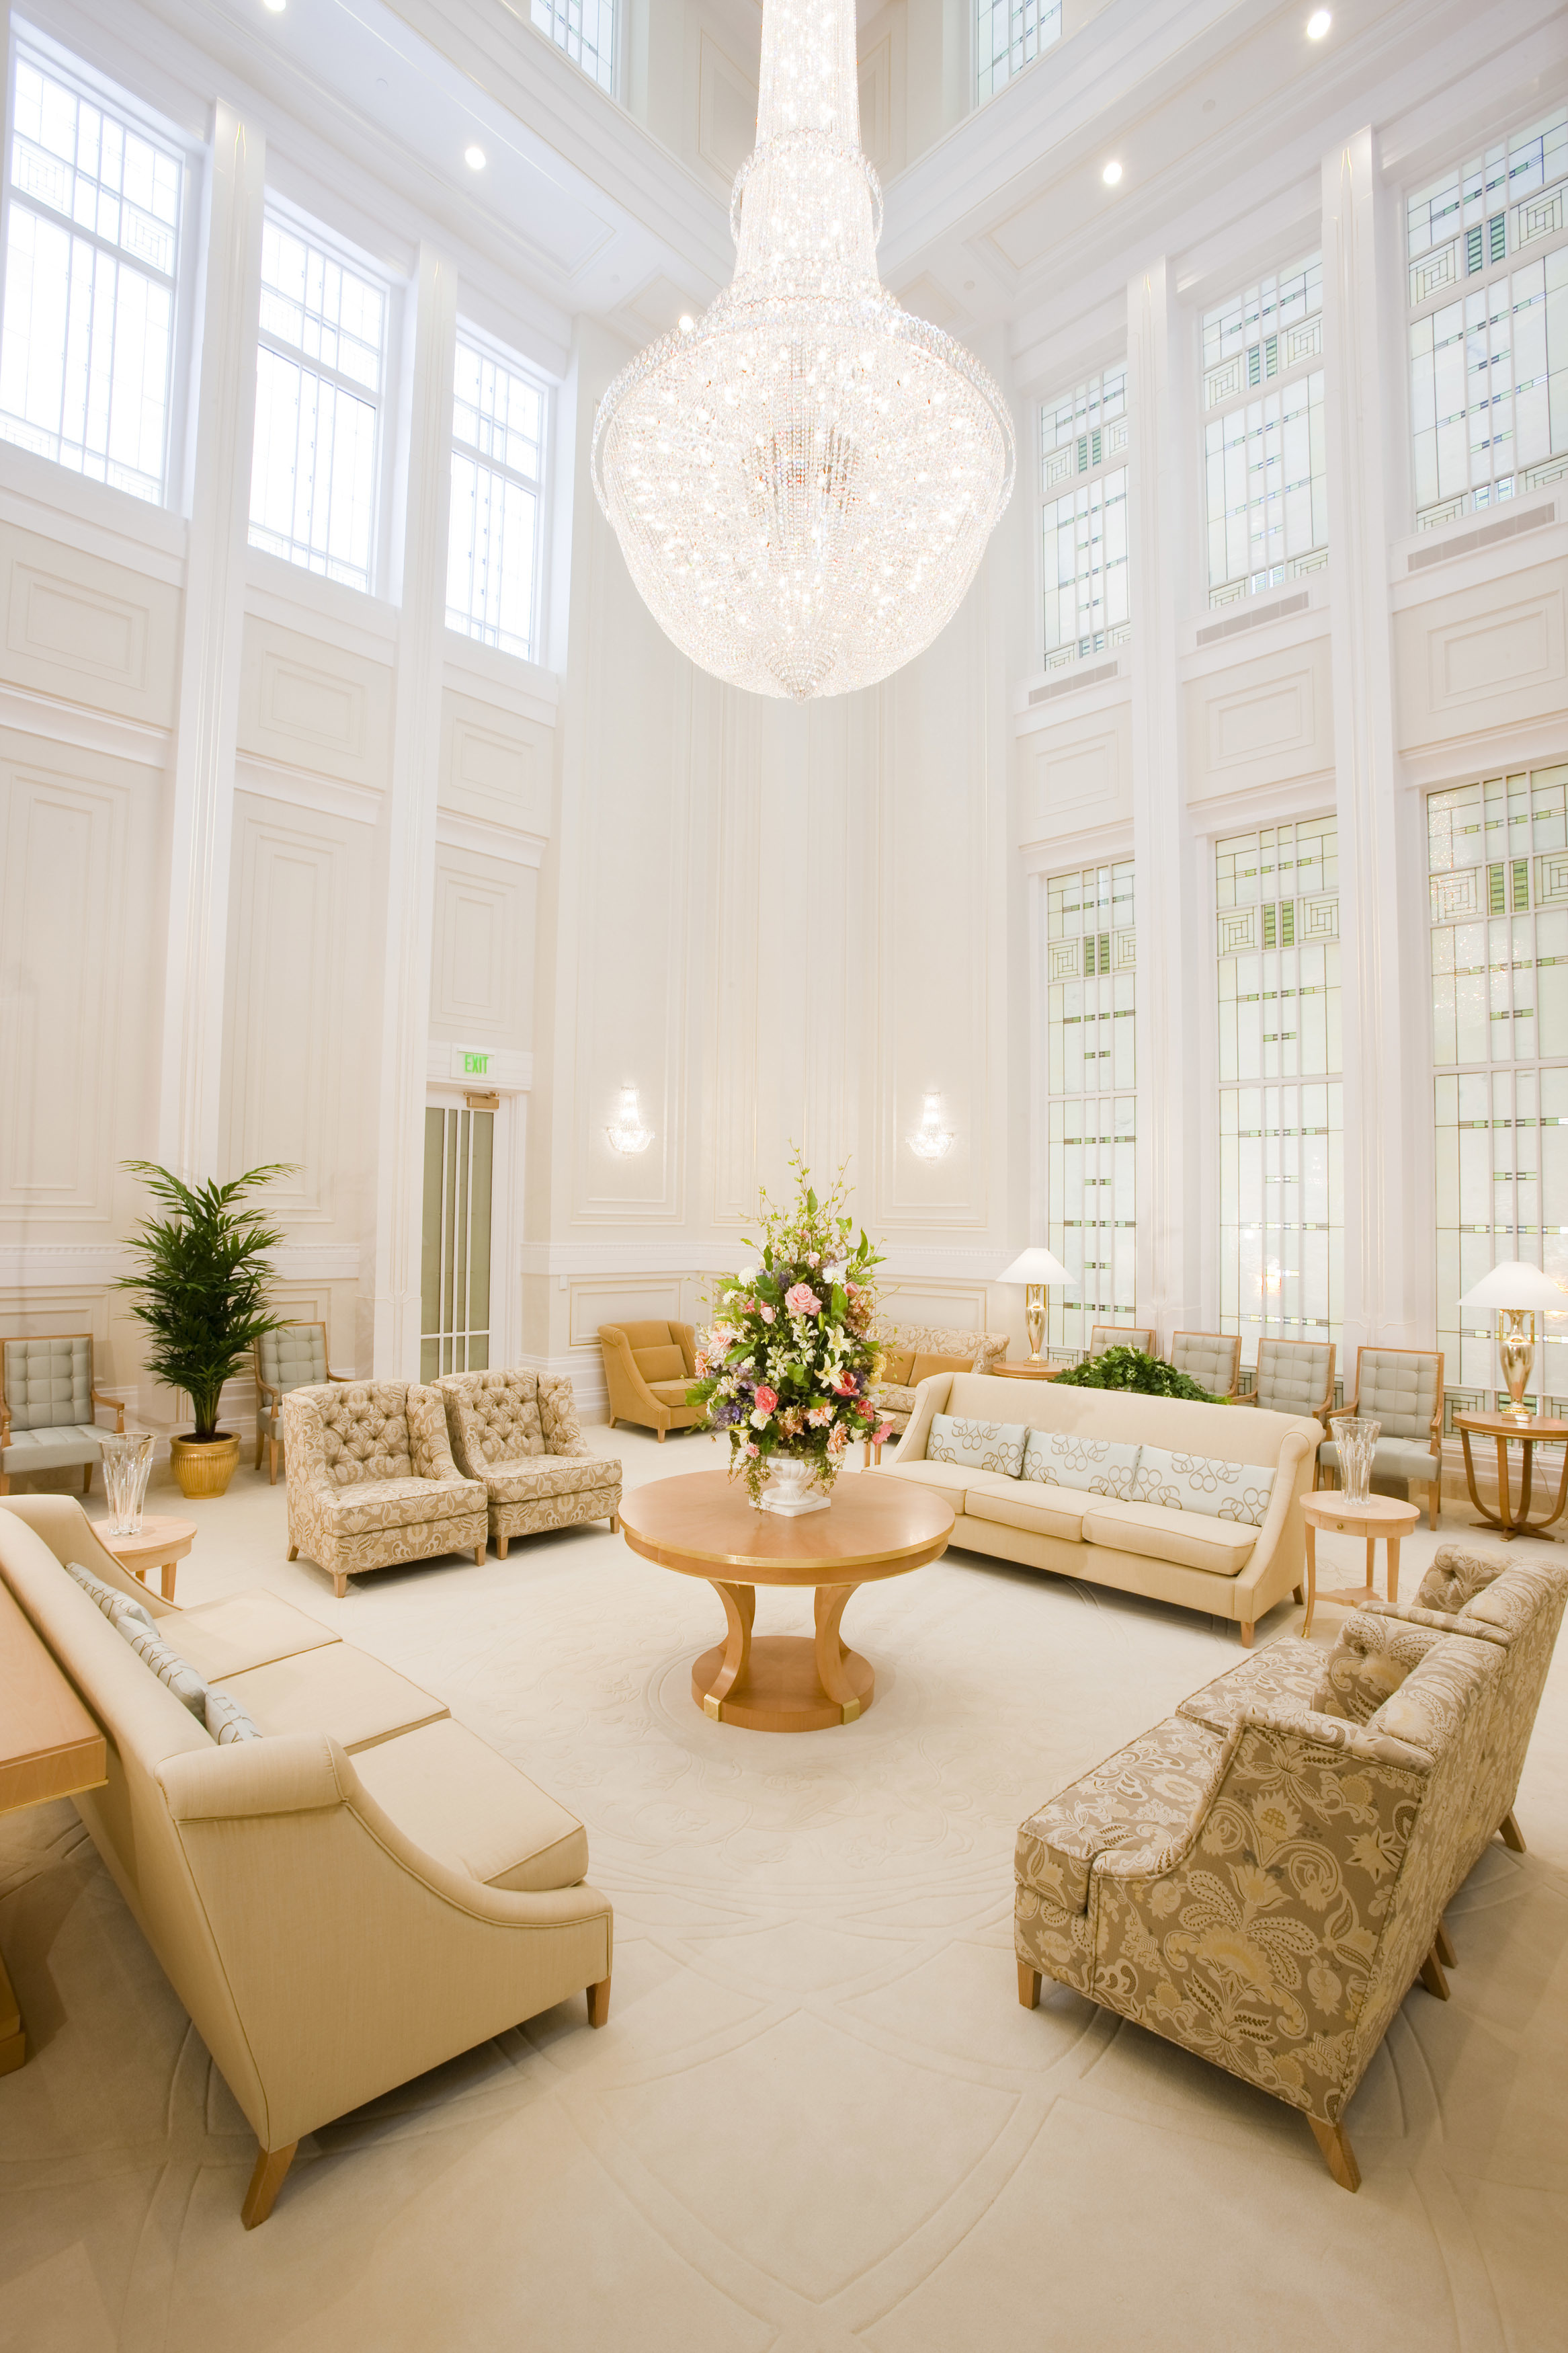 A tall, white room with white couches and a tall chandelier hanging from the ceiling.